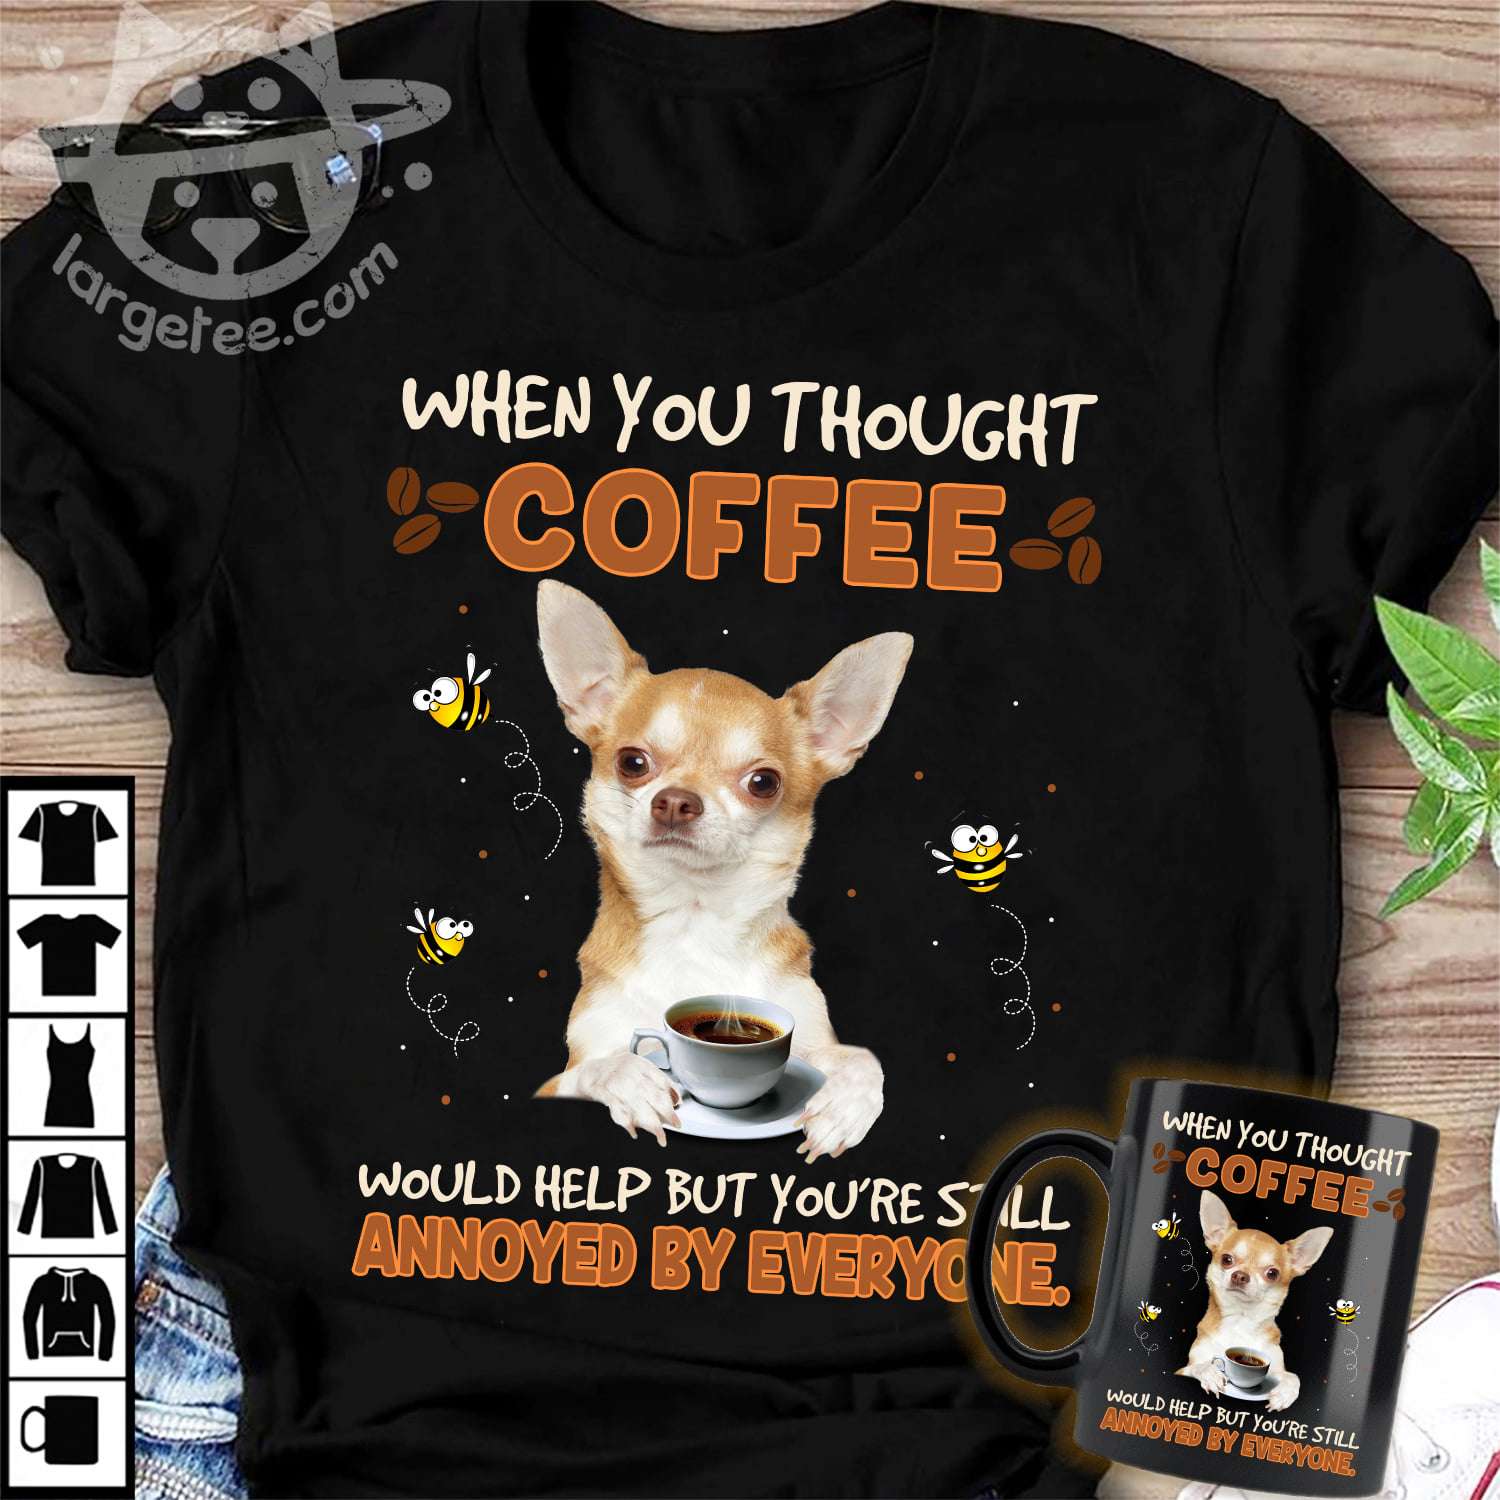 When you thought coffee would help but you're still annoyed by everyone - Chihuahua and coffee, gift for coffee addiction